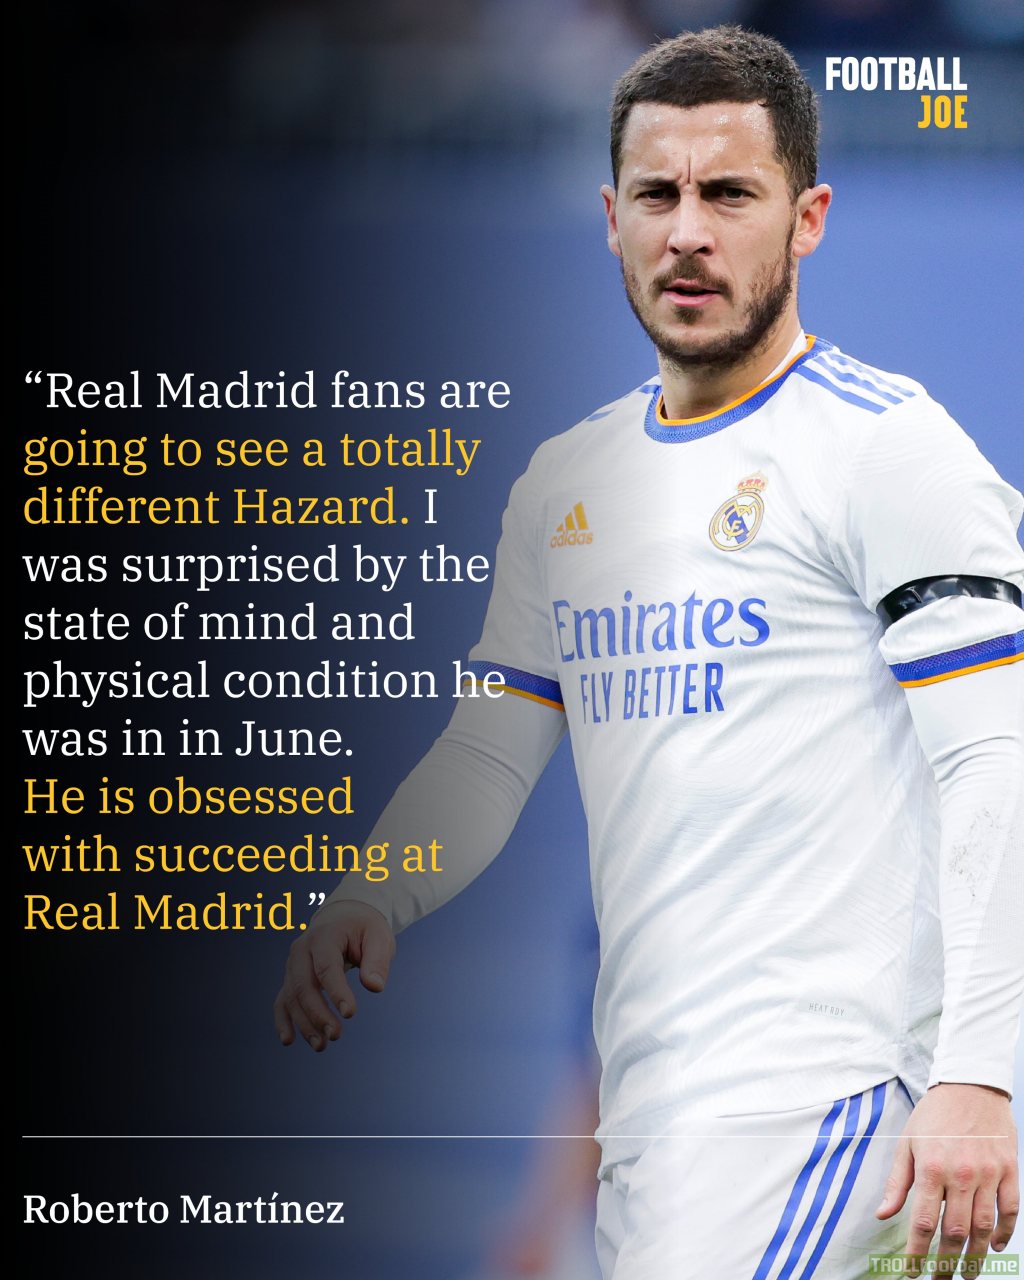 [Football Joe] Roberto Martinez "Real Madrid Fans Are Going To See Totally Different Hazard."